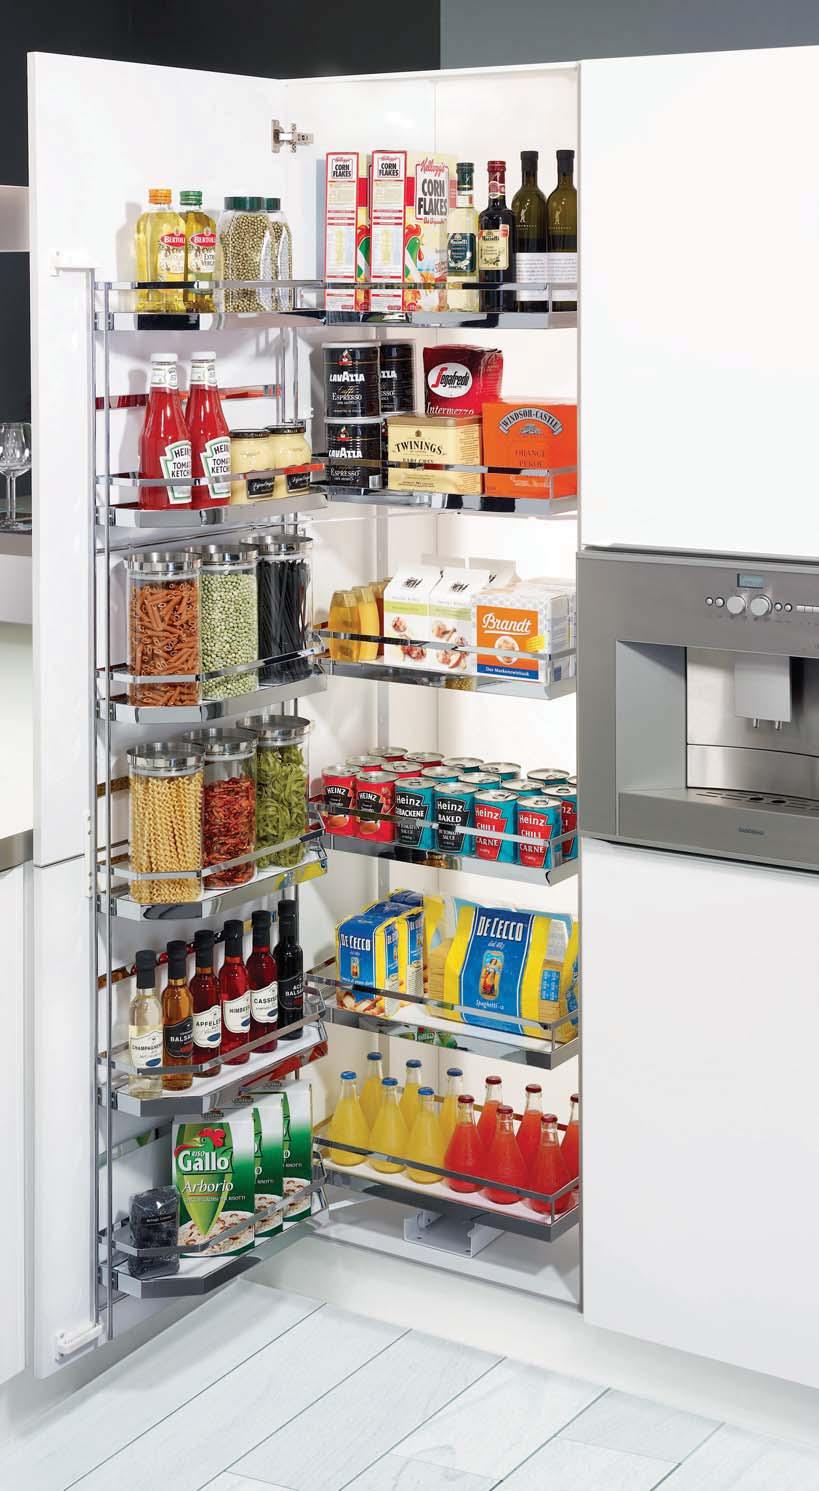 SHELVES/BASKETS INCLUDED PANTRY UNIT - TANDEM For cabinet widths between 450, 500 and 600 mm. Complete set consists of runner, pull-out frame, trays/basket and doorshelf (trays/baskets).